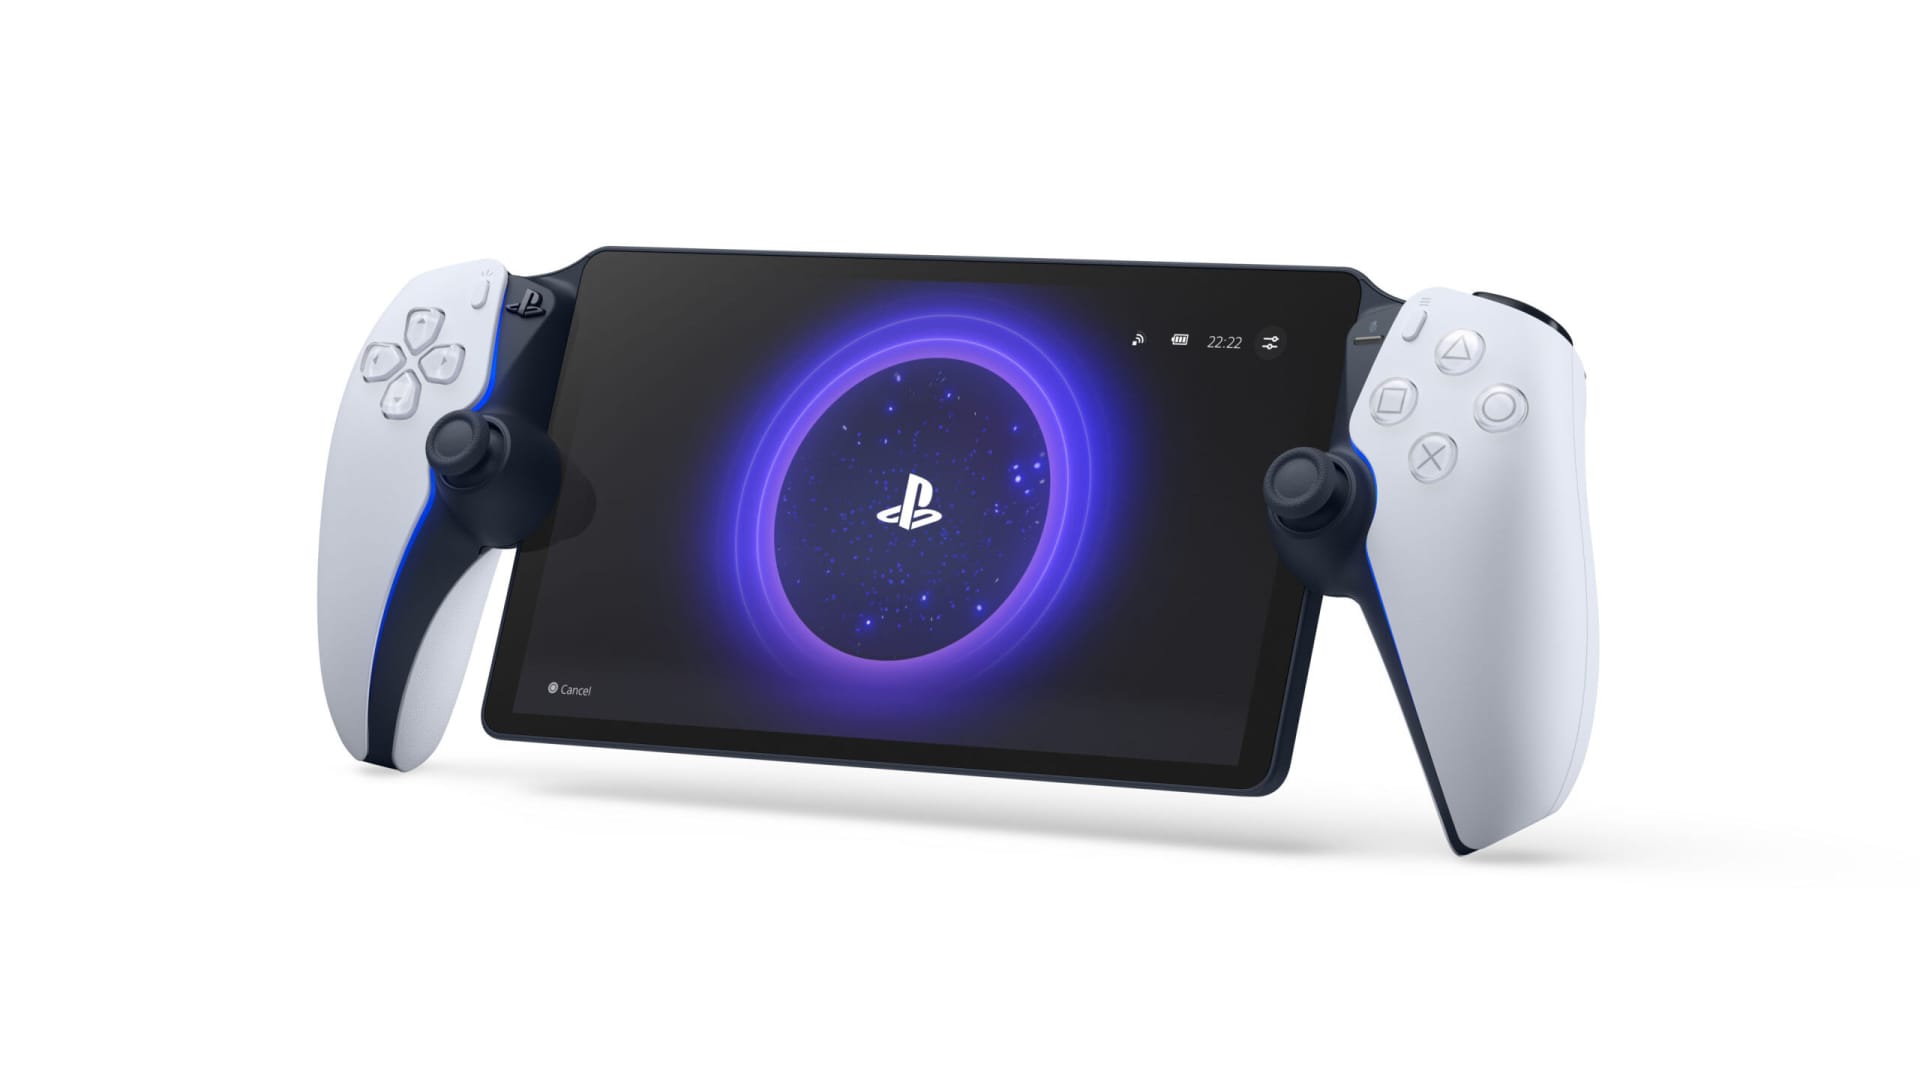 Sony’s PlayStation Portal Gets Release Date While Fans Keep Asking for a Real Portable Console